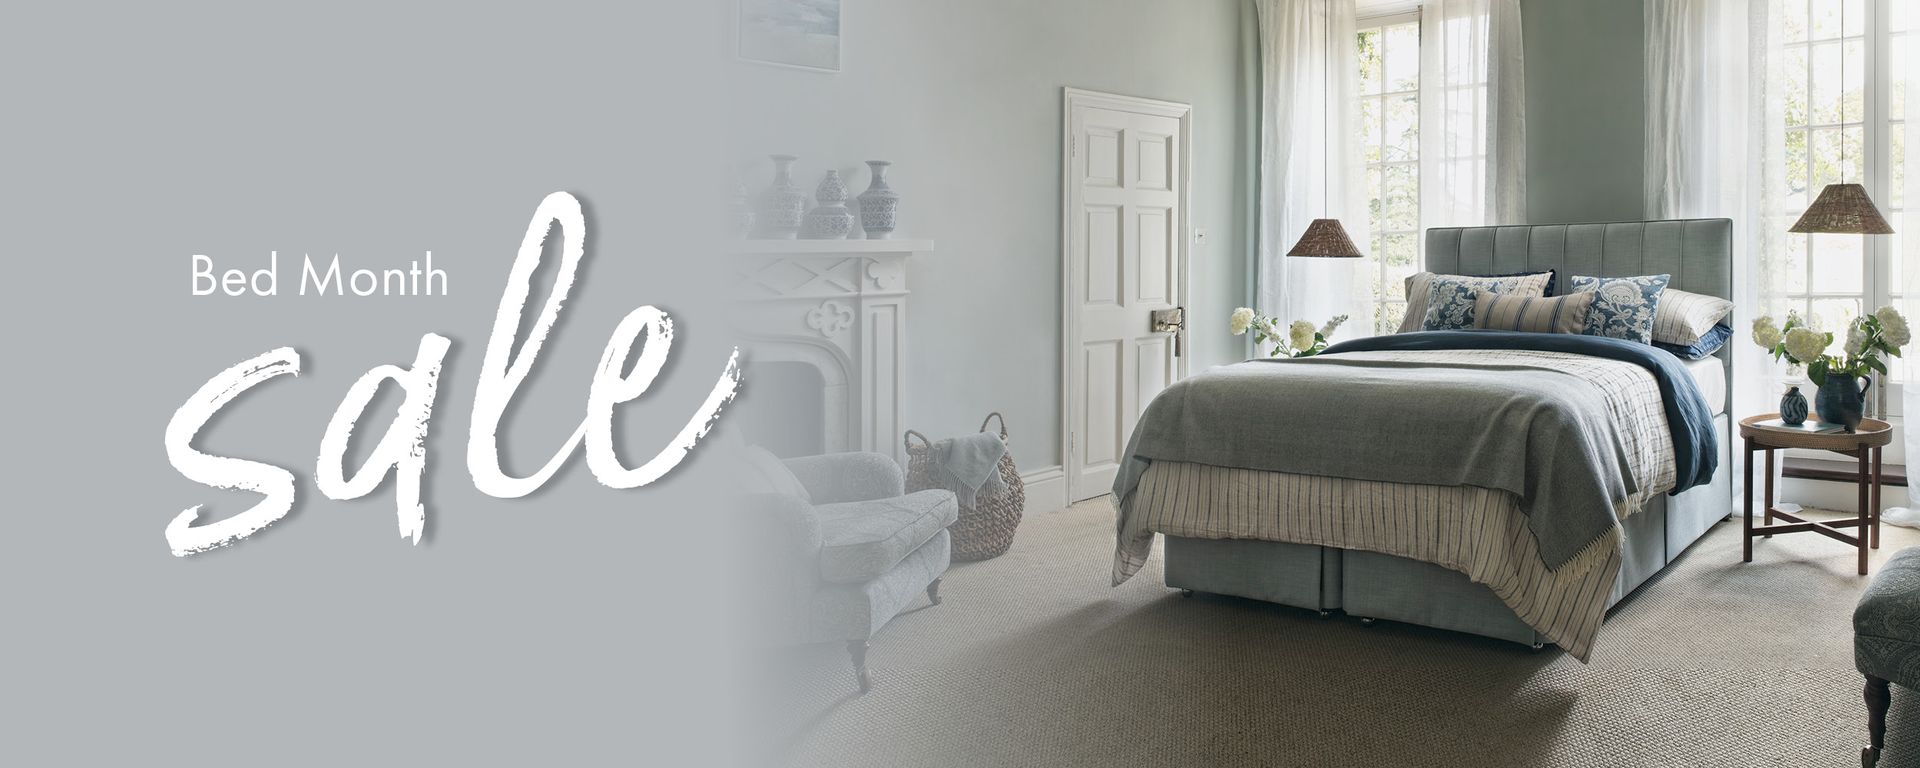 bed month sale at david phipp furniture store in dorset